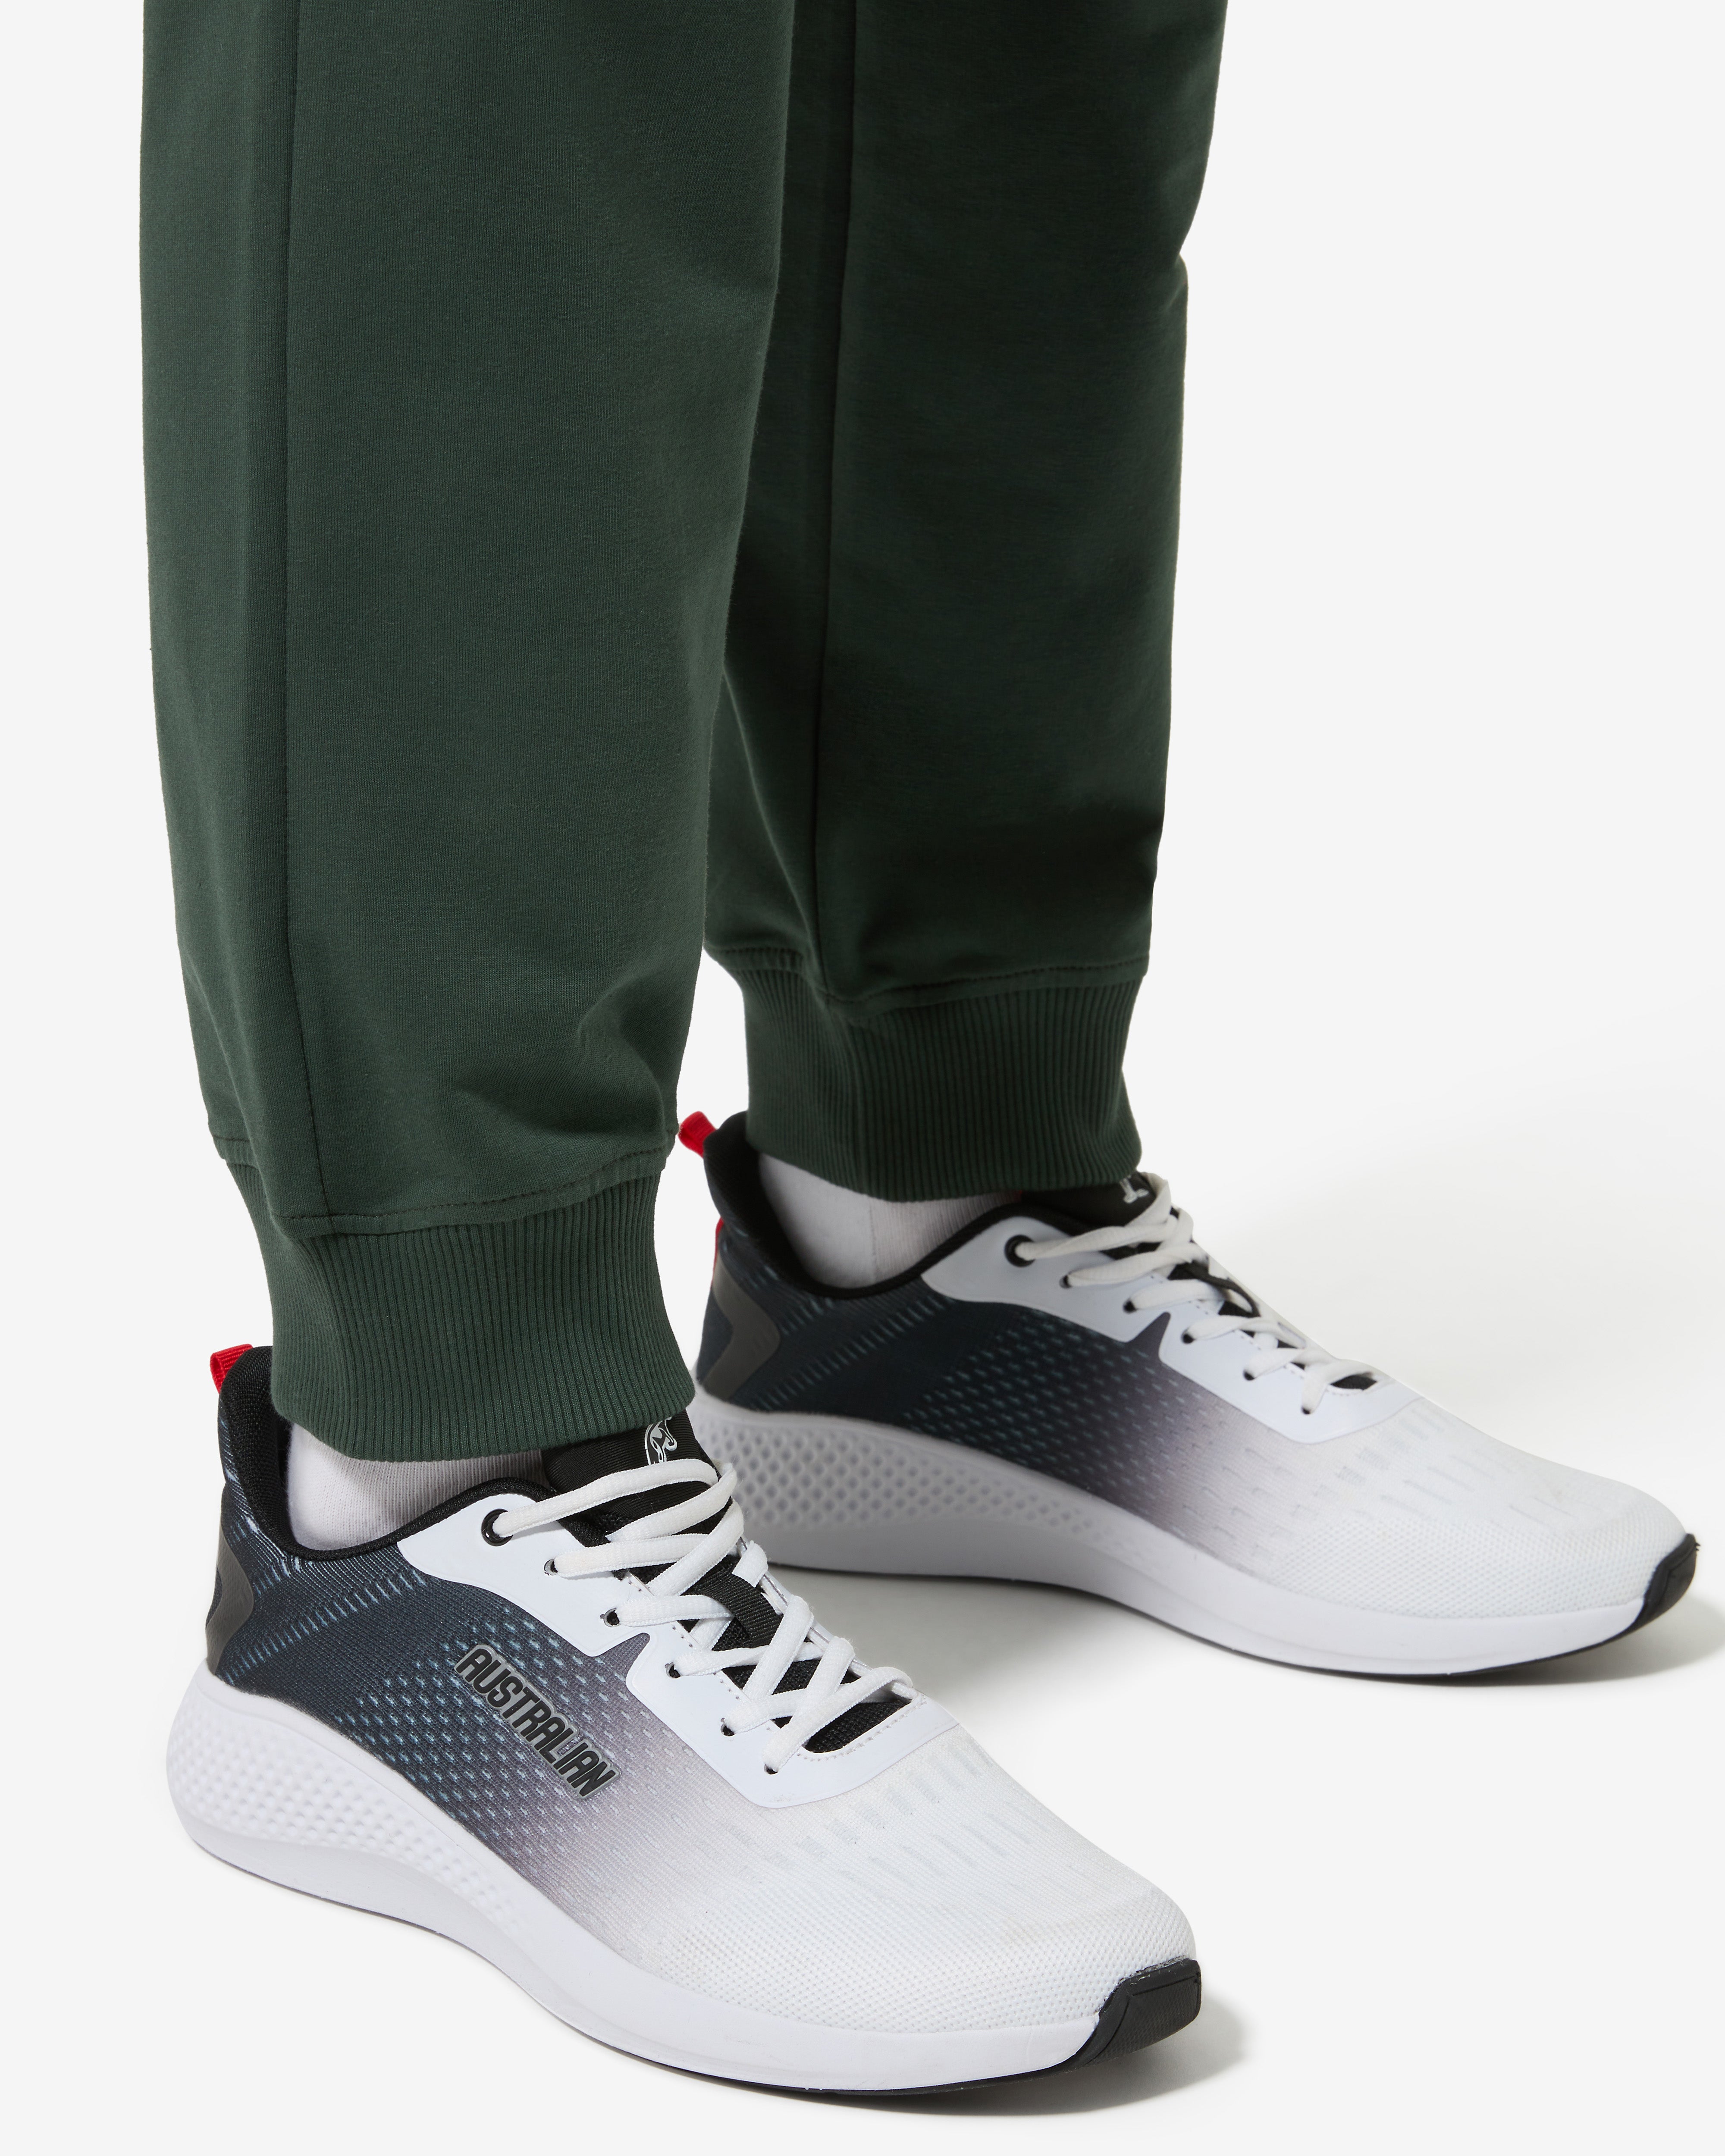 Essential Camomps Track Pant